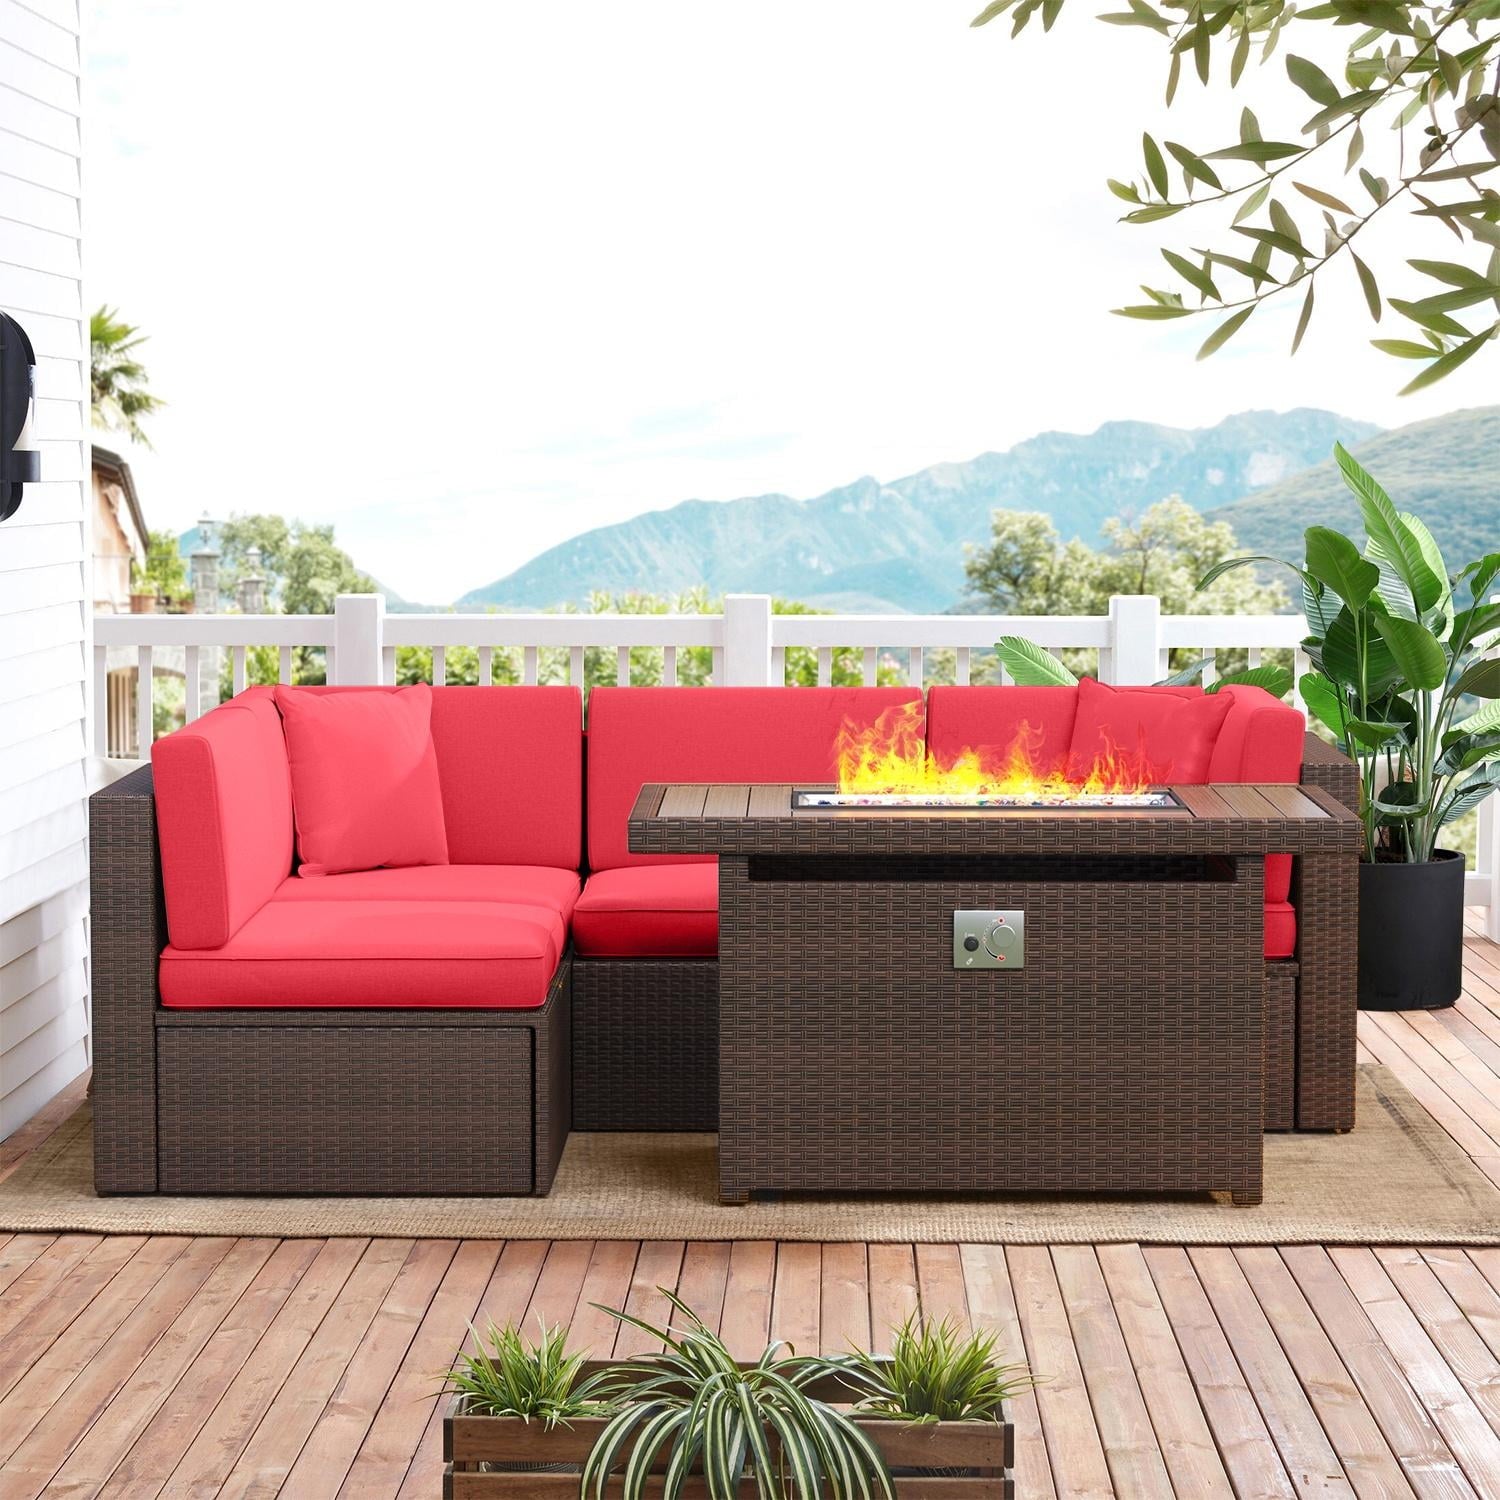 5 Piece Patio Furniture Set, Outdoor Patio Furniture Sets with Fire Pit, Wicker Patio Furniture, Outdoor Conversation Set with Red Cushions